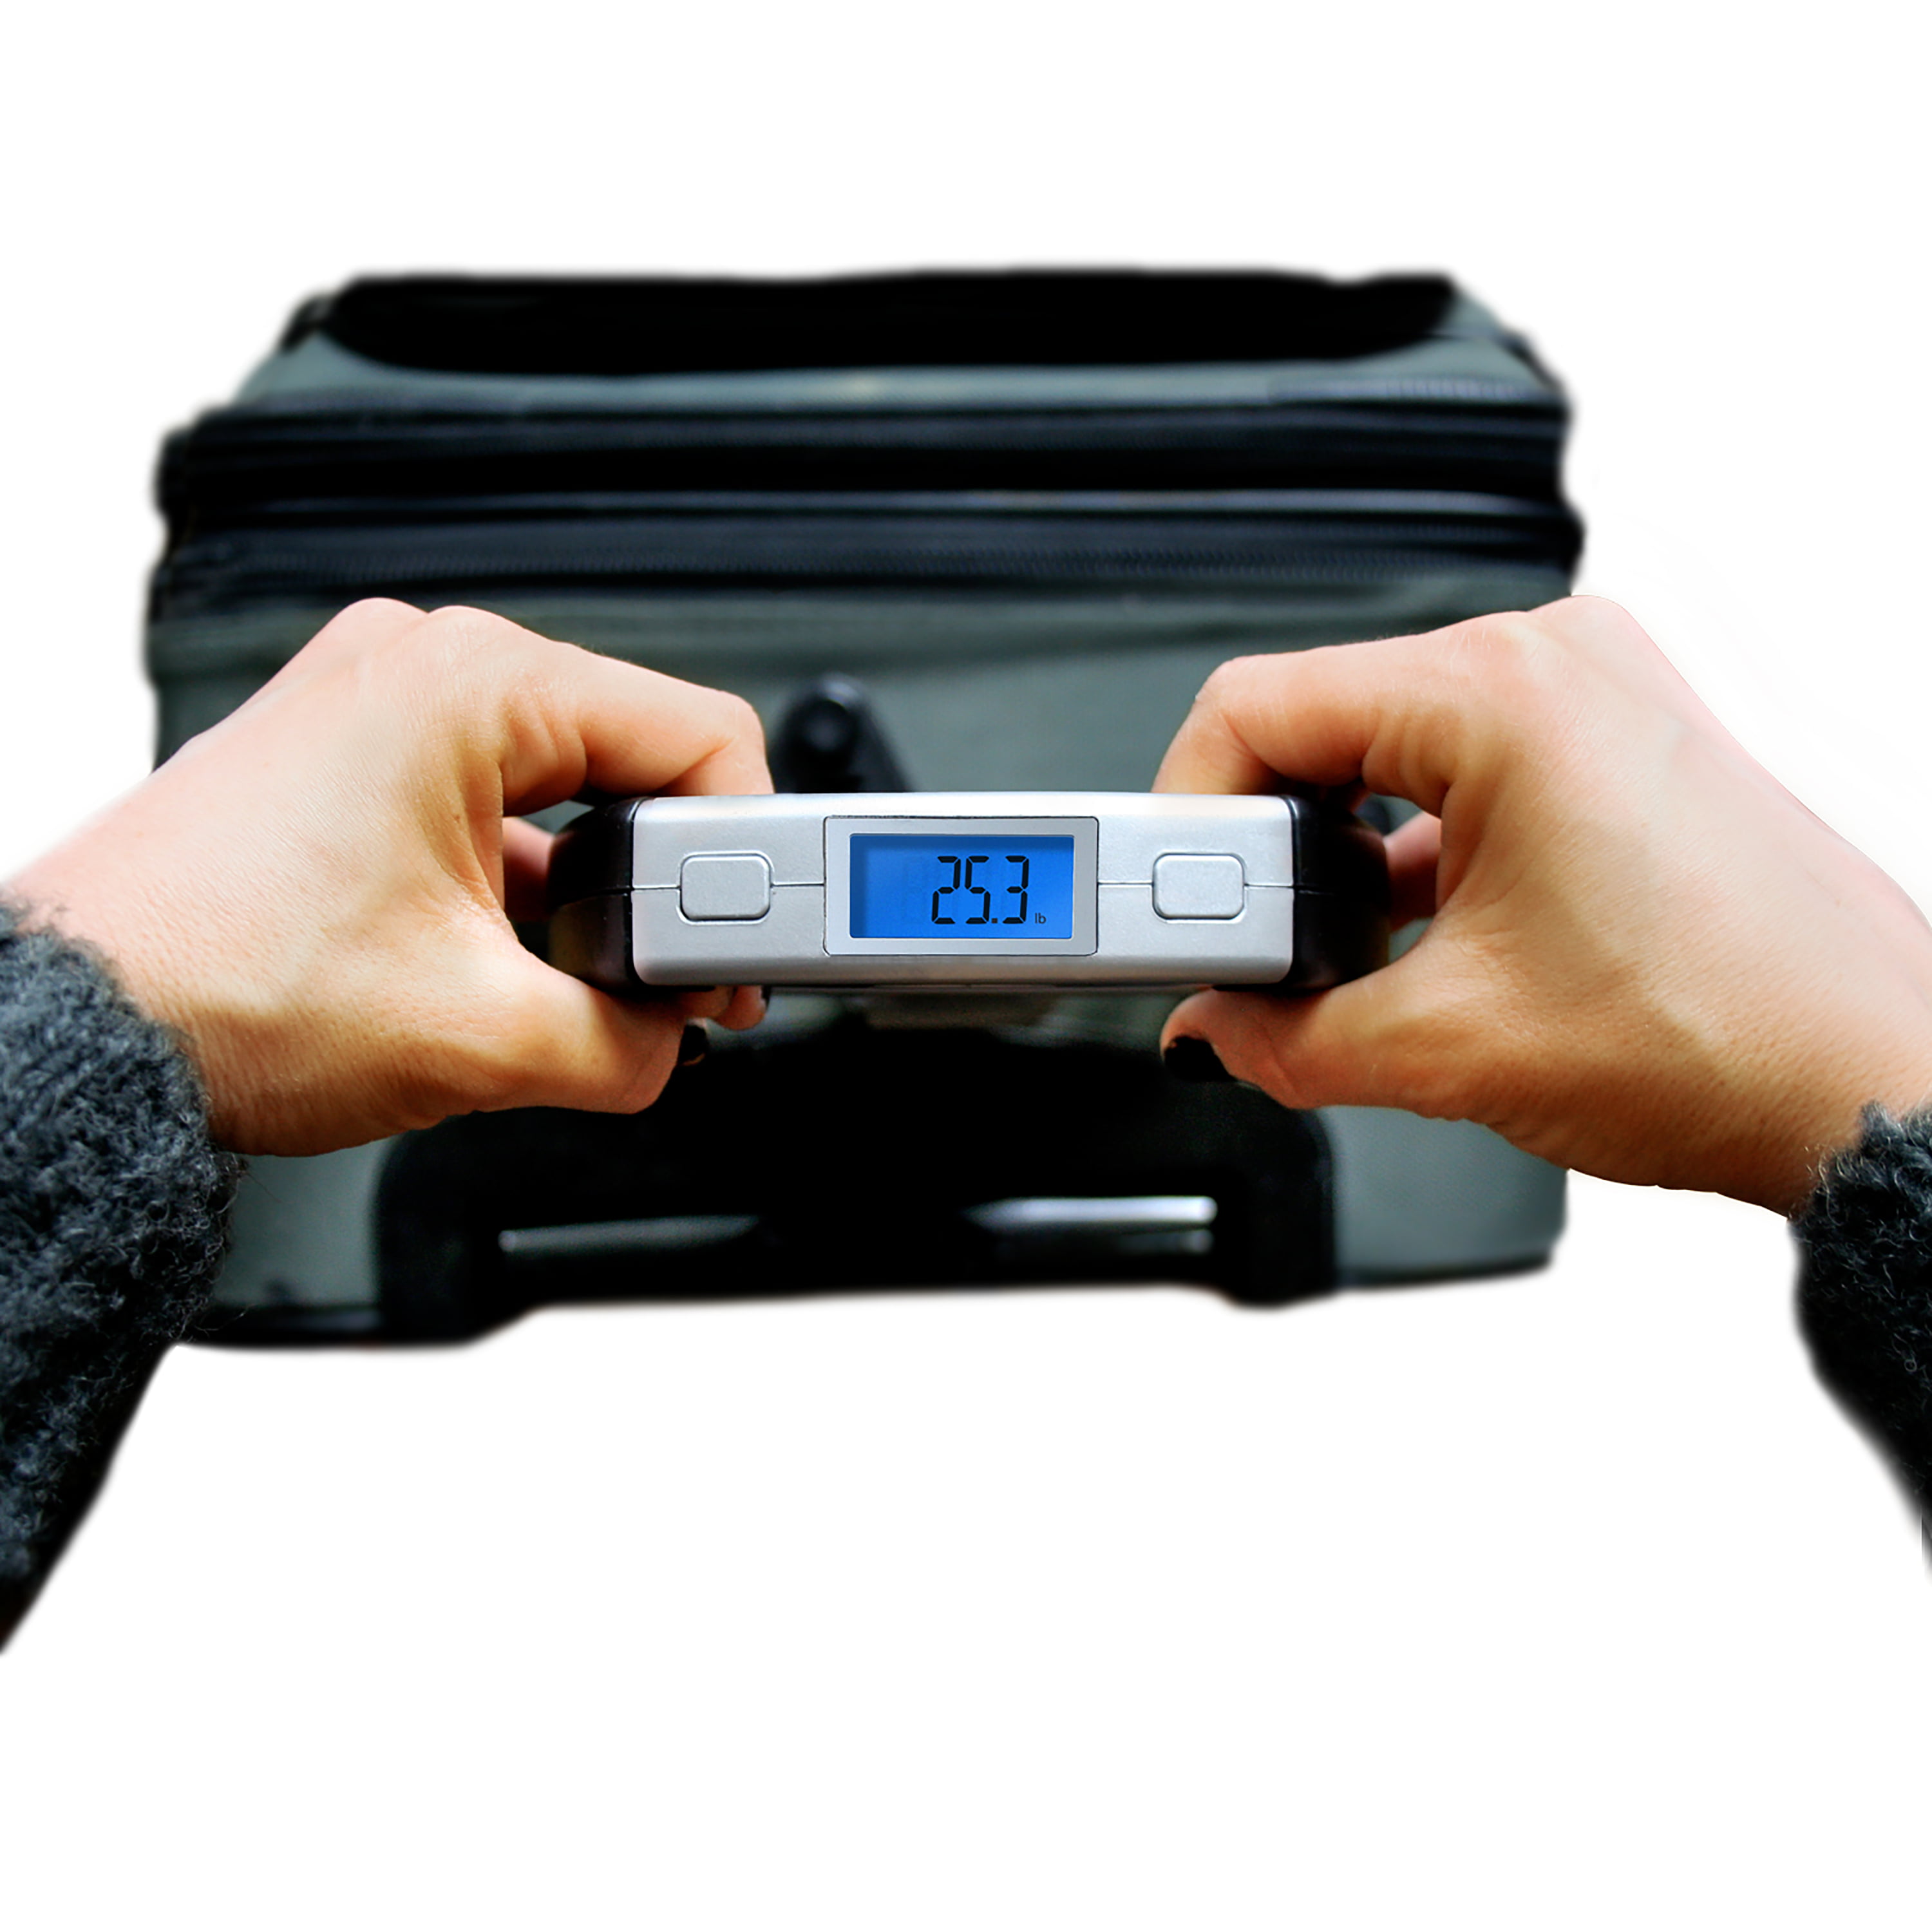 Digital Luggage Scale, 110 LBS by UNIQUEWARE